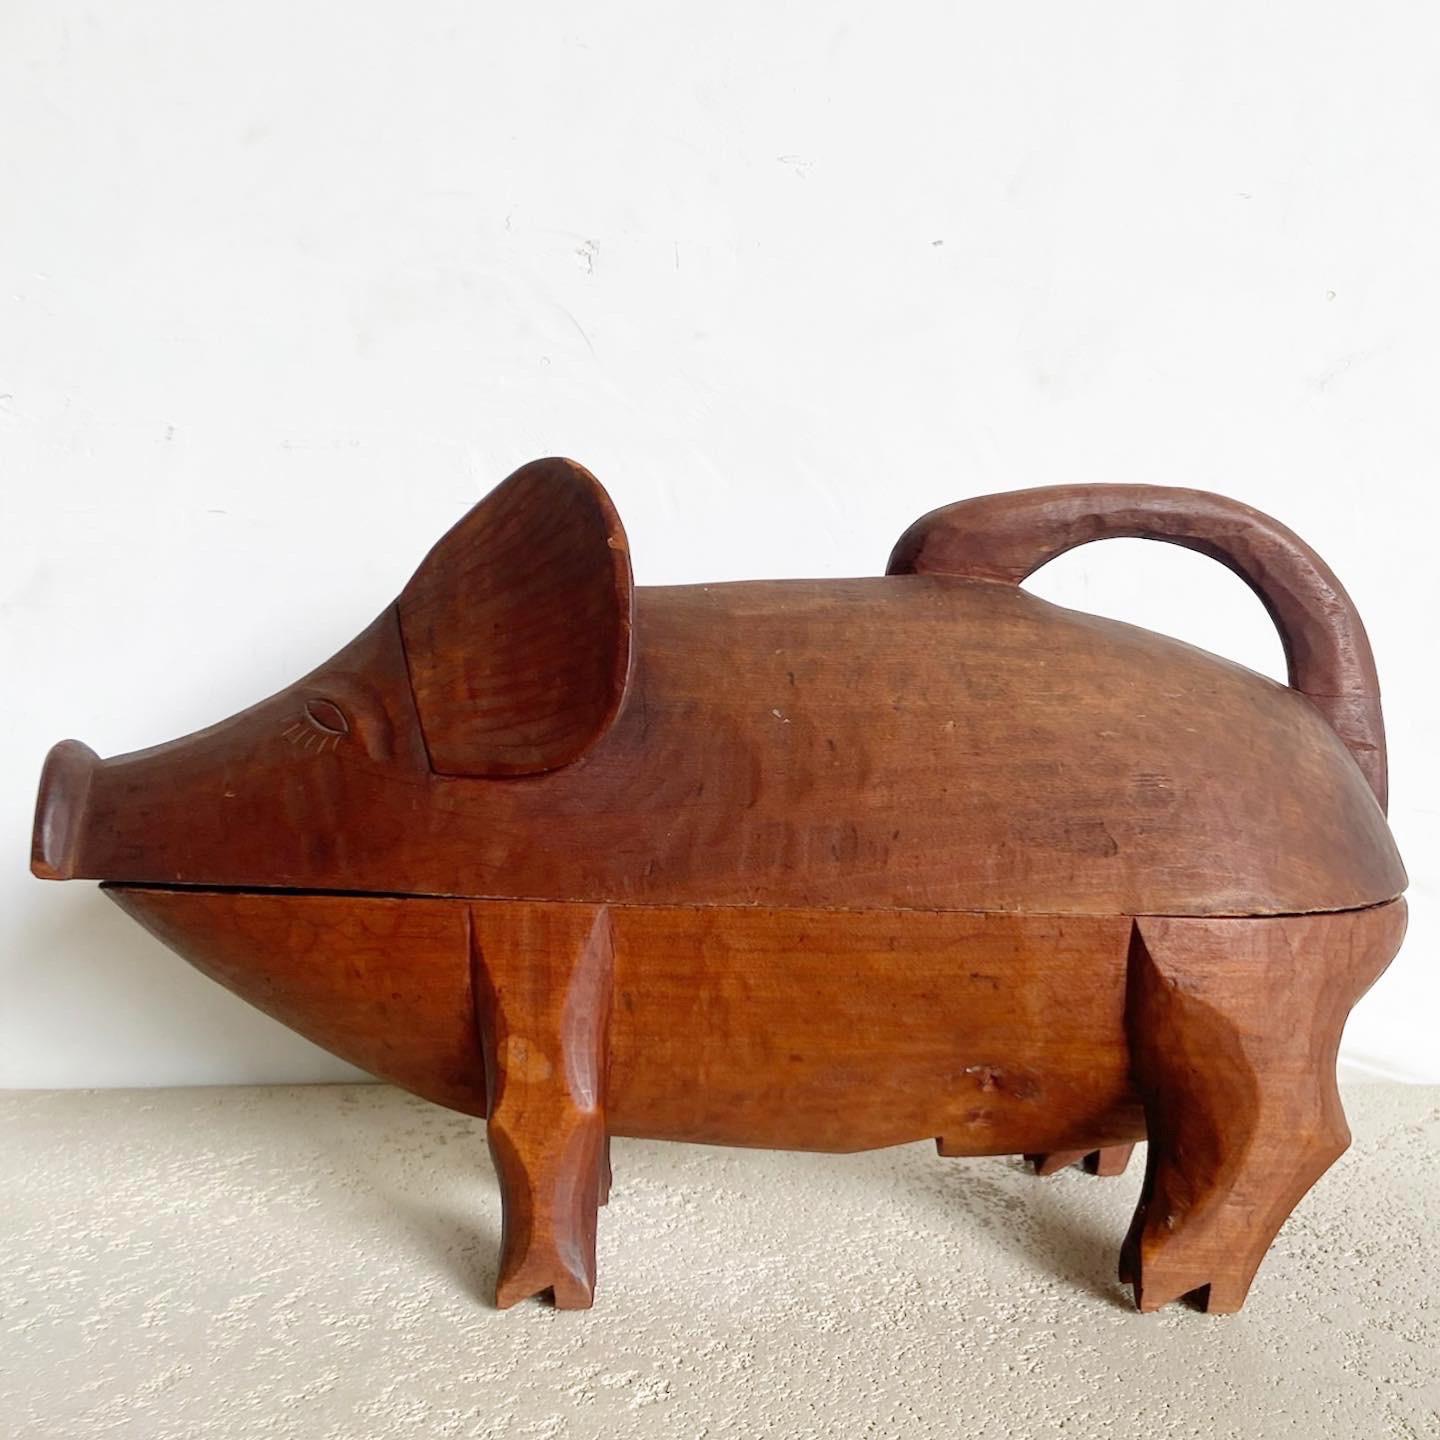 20th Century Vintage Hand Carved Wooden Pig Container/Tray